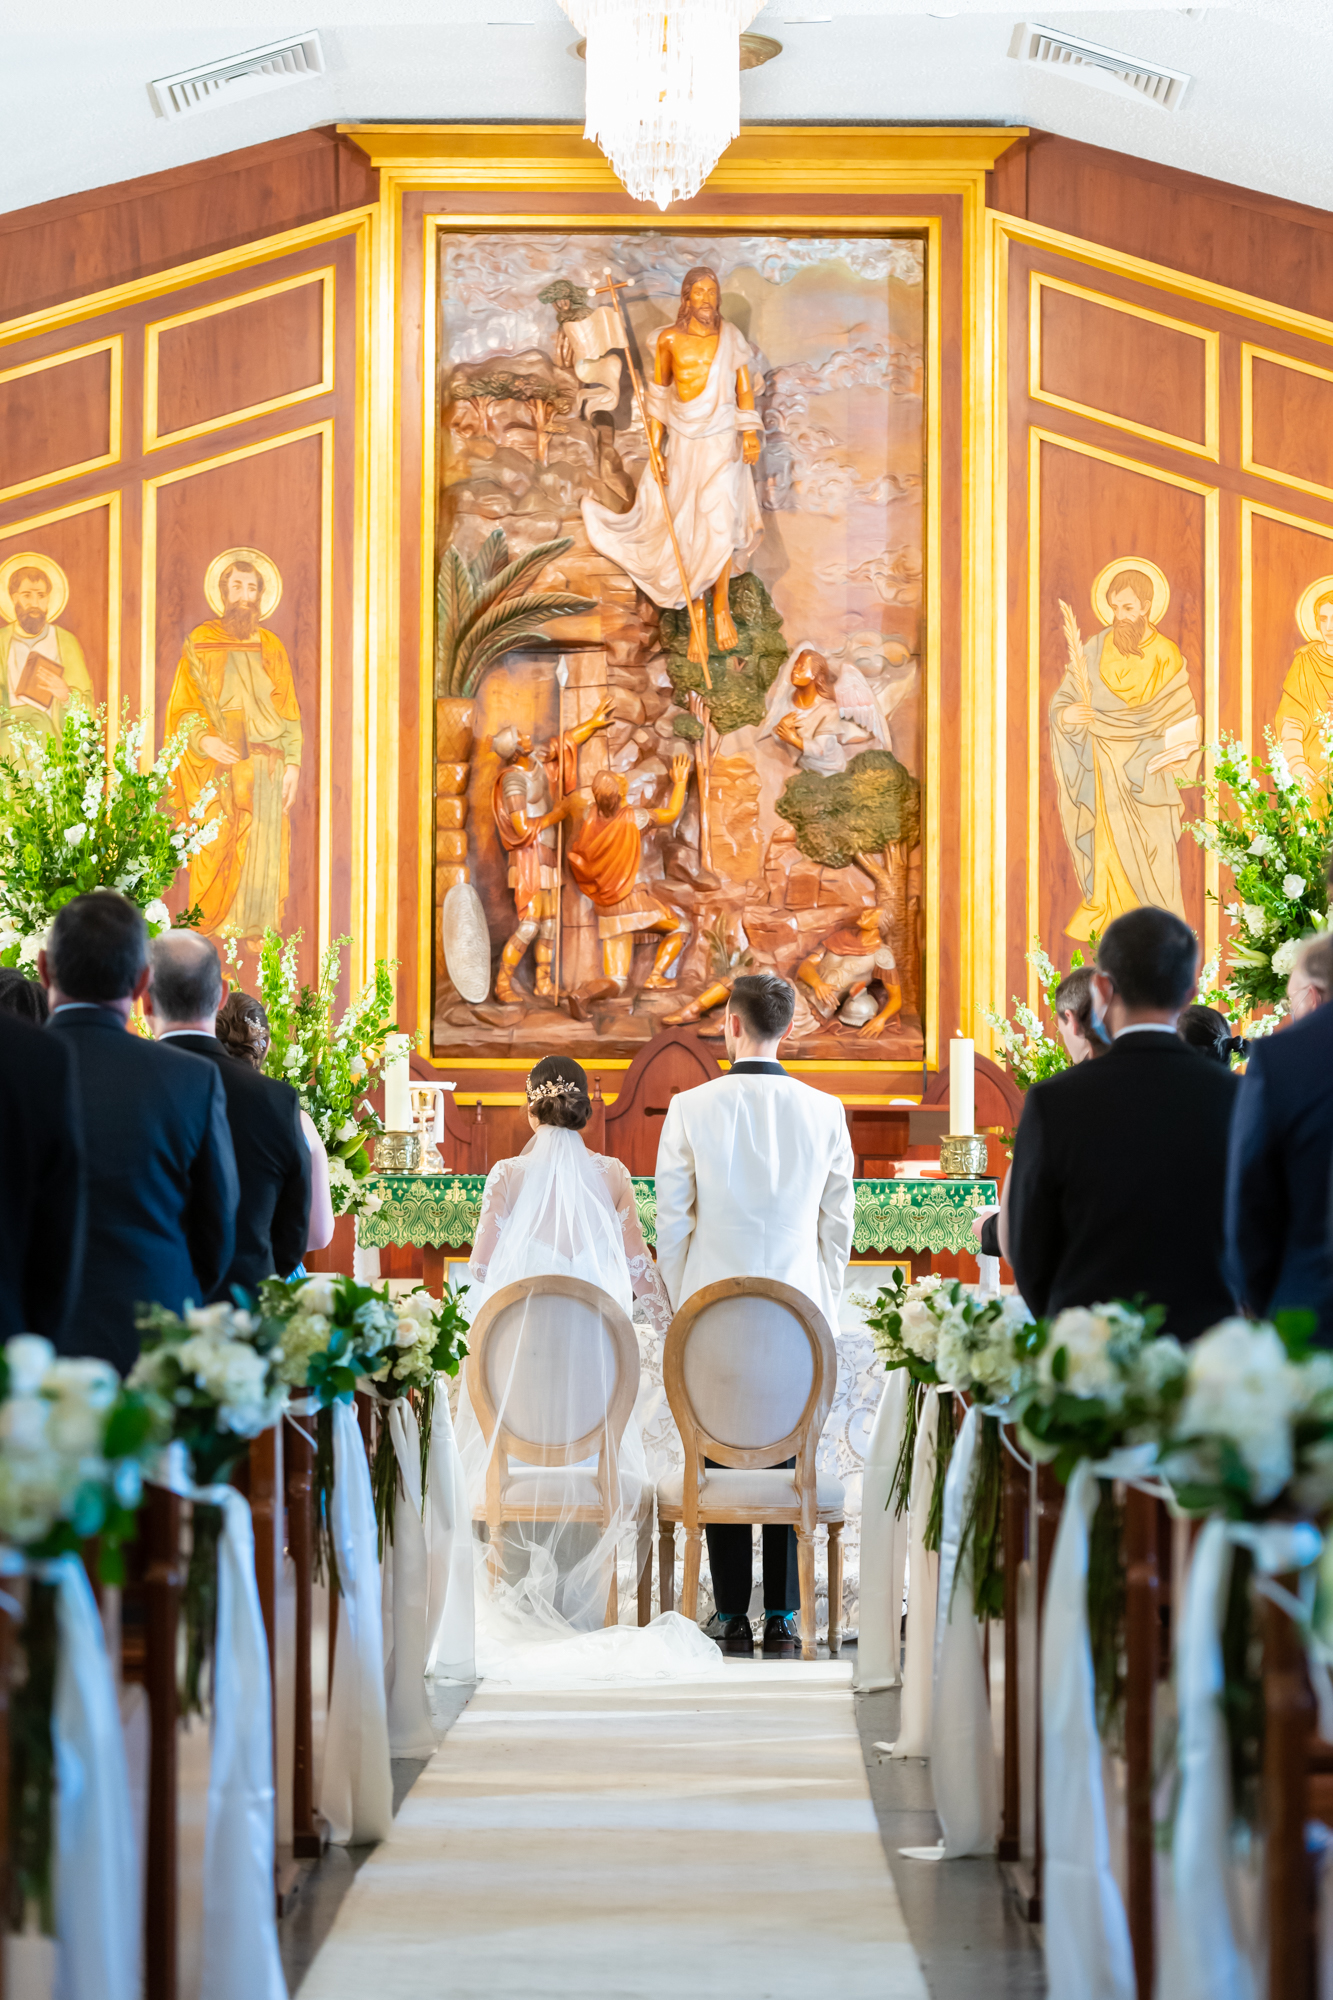 Back view of couple in front of altar